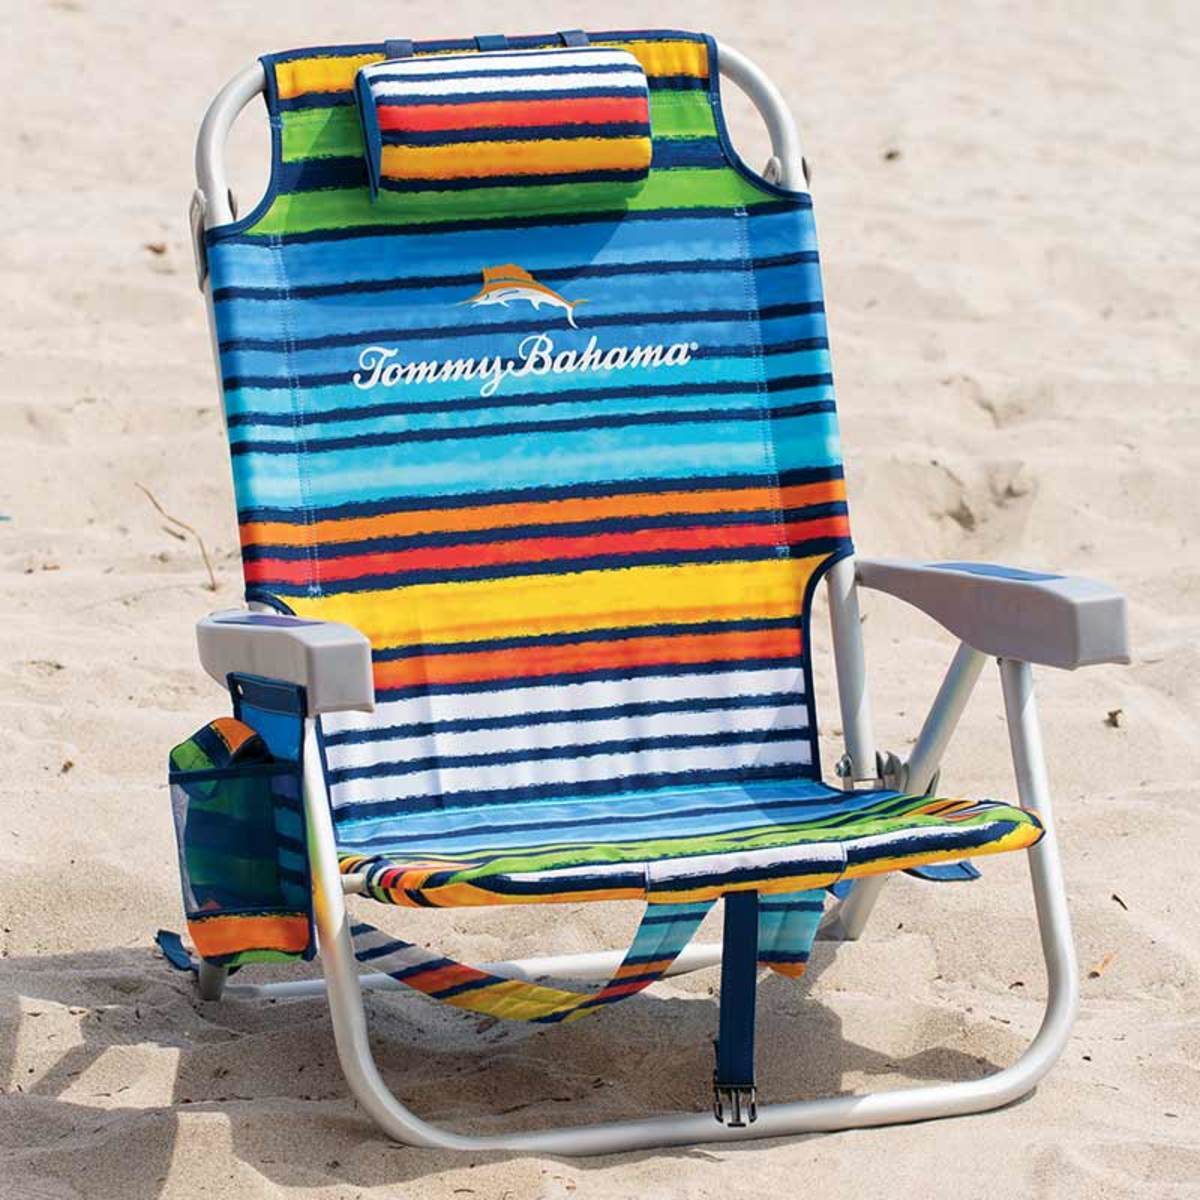  Tommy Bahama Windsurfer Beach Chair for Small Space